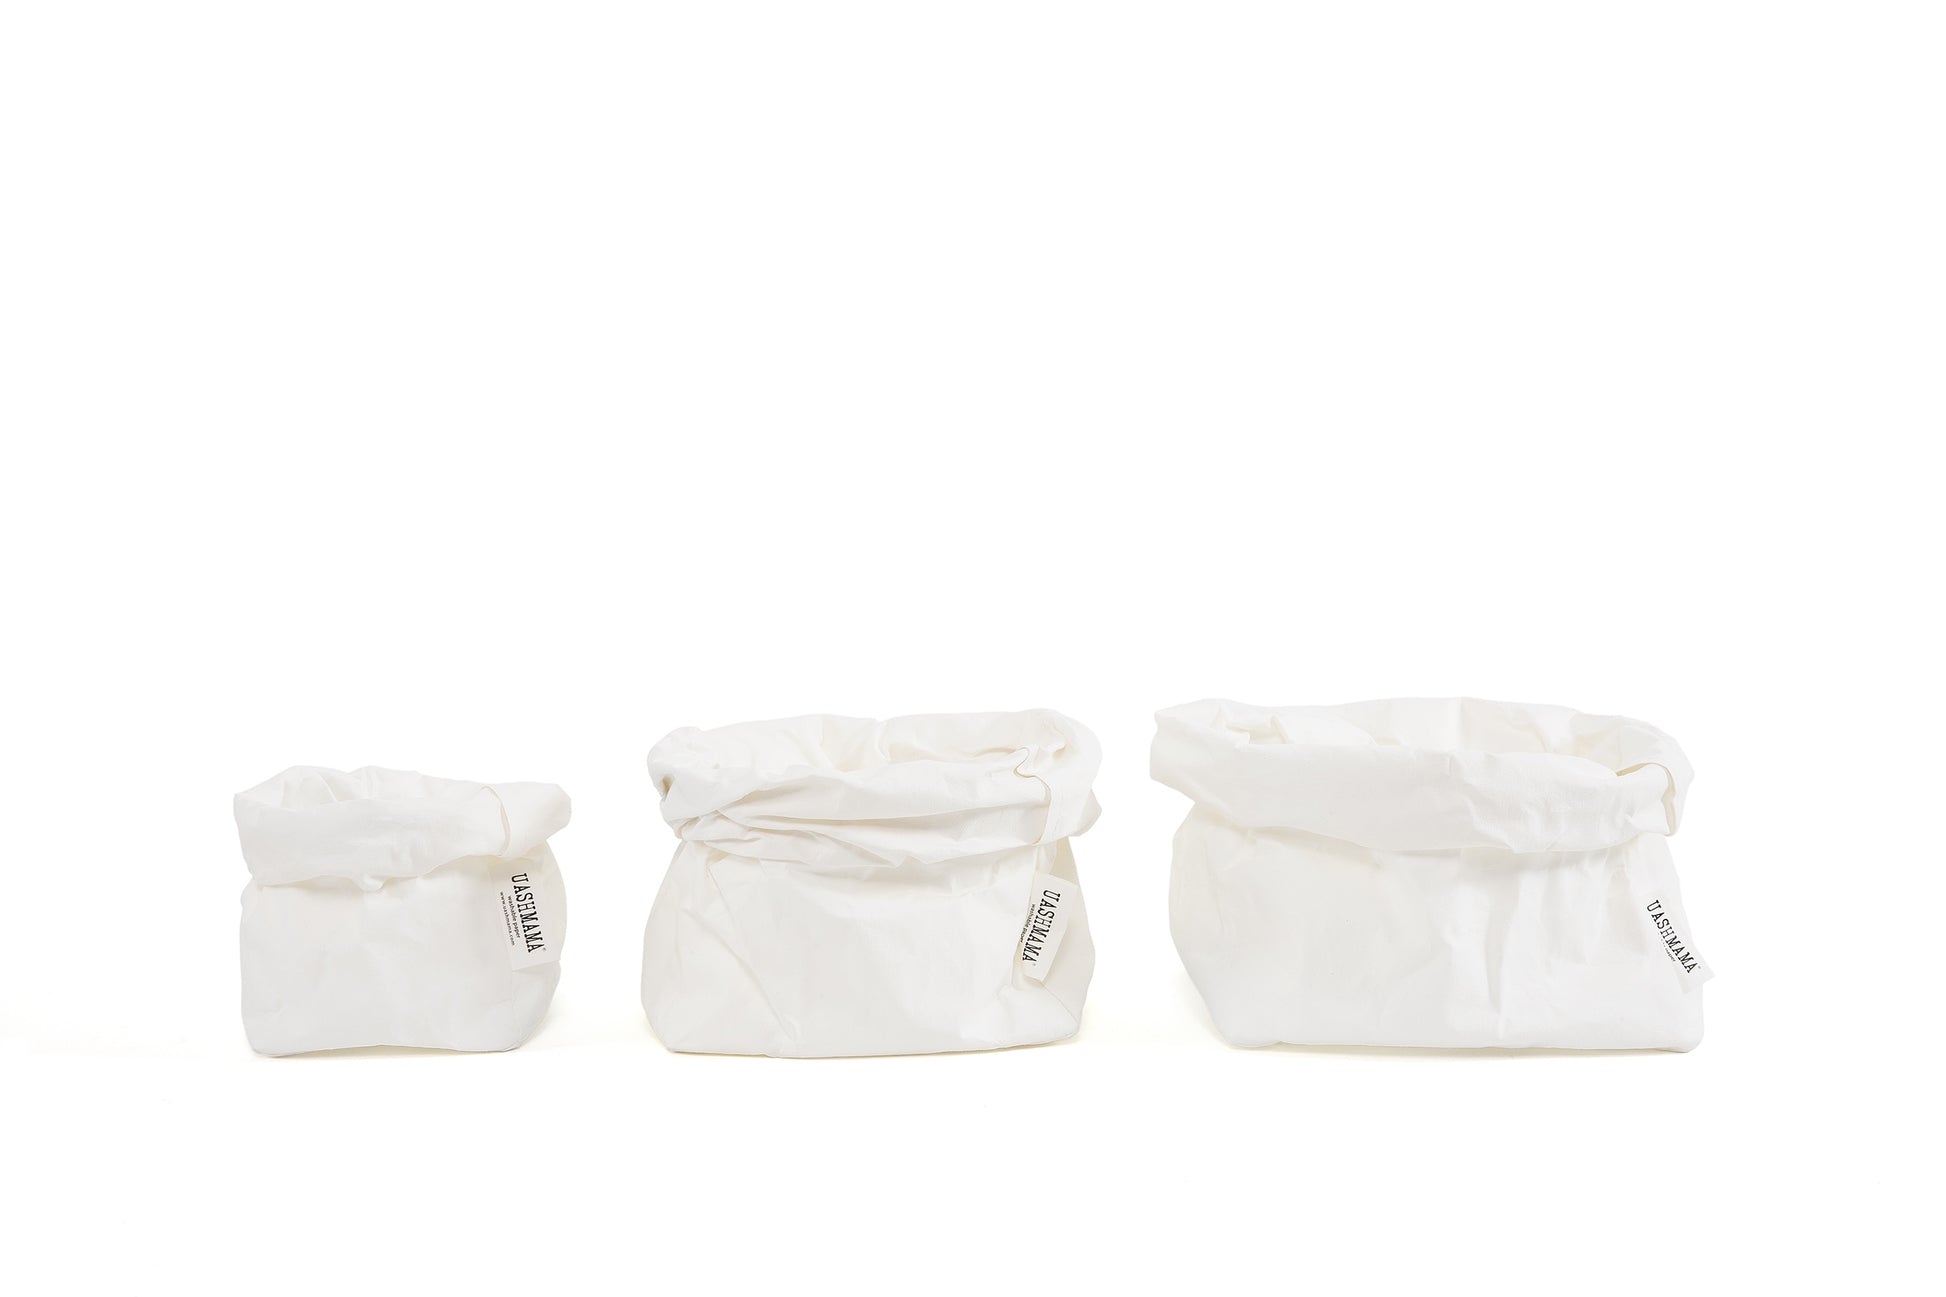 A small, medium and large paper bag in white go from smallest to largest in a horizontal row. 